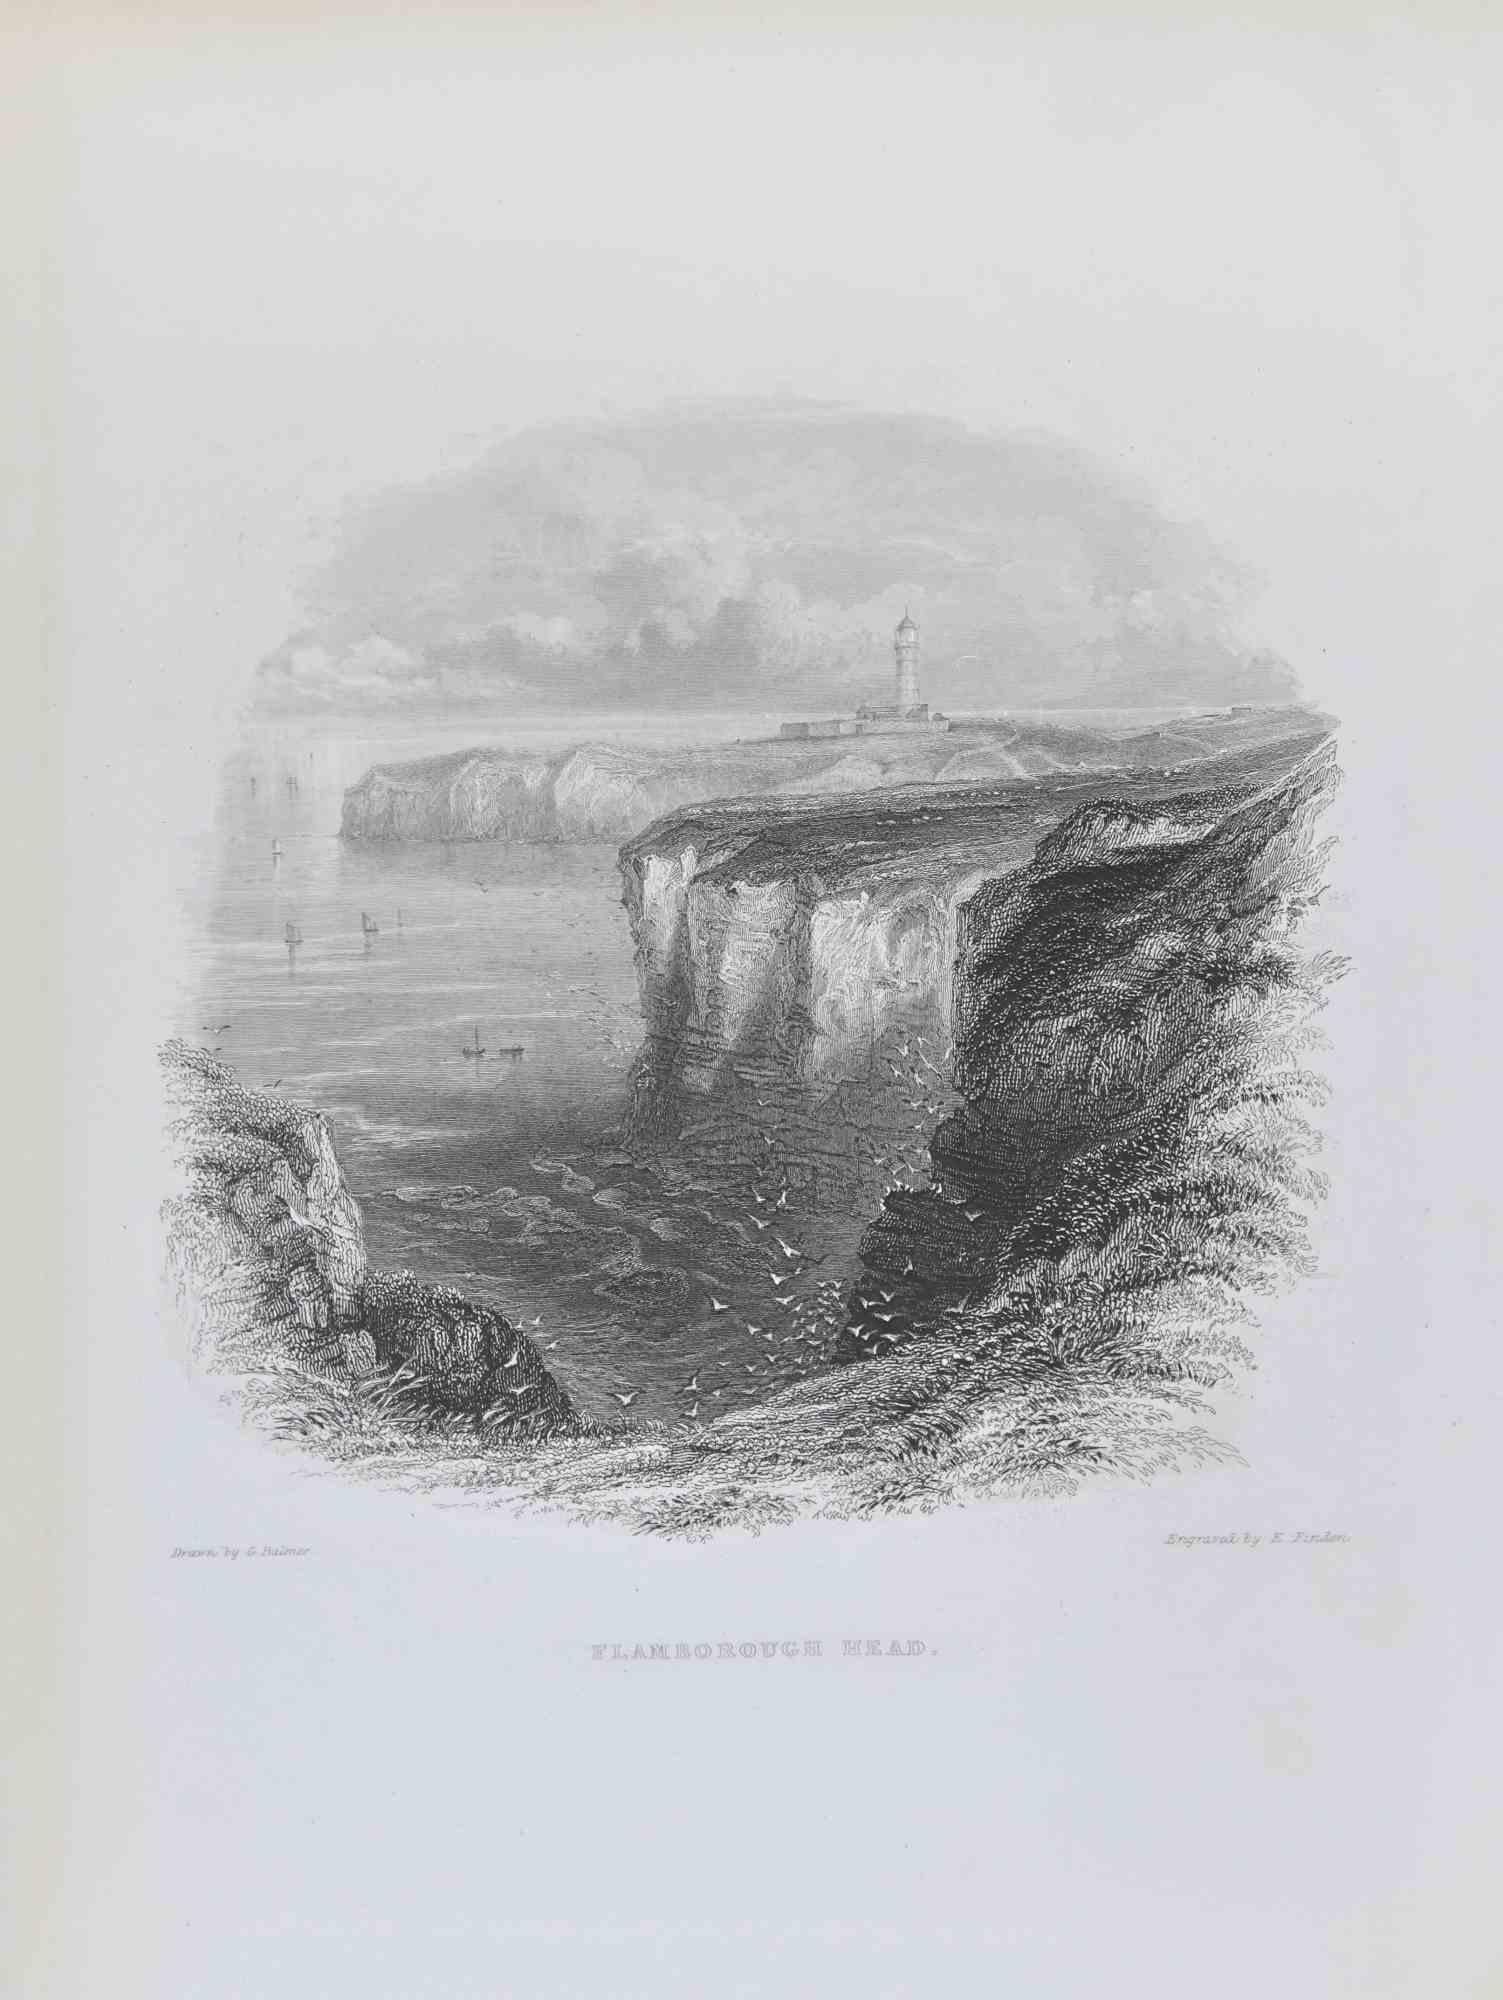  Flamborough Head is a lithograph on paper realized by the artist George Balmer .

Signed on the plate on the lower left. Titled on the lower center. Engraved by E. Finden

The state of preservation is good, only a yellowed paper along the